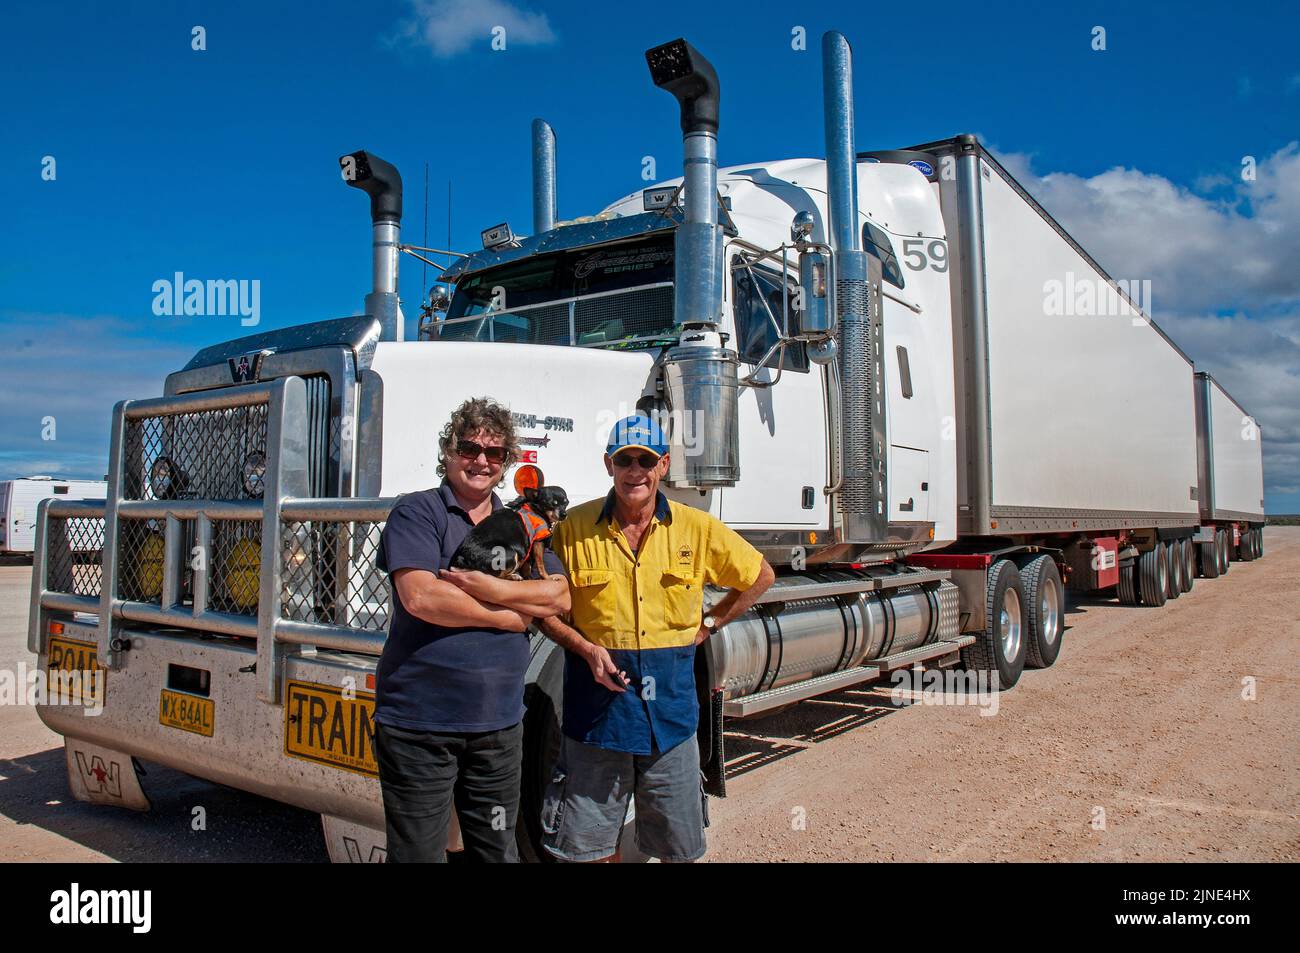 Fay Frances-Lewis, woman truck driver on the road with the B-Double she drives freighting 75 tonnes of ripe tomatoes the 2695 km between Perth and Adelaide twice a week.Covering over 10,000 kms per week, she is accompanied by her husband as offsider and her pet dog. Stock Photo